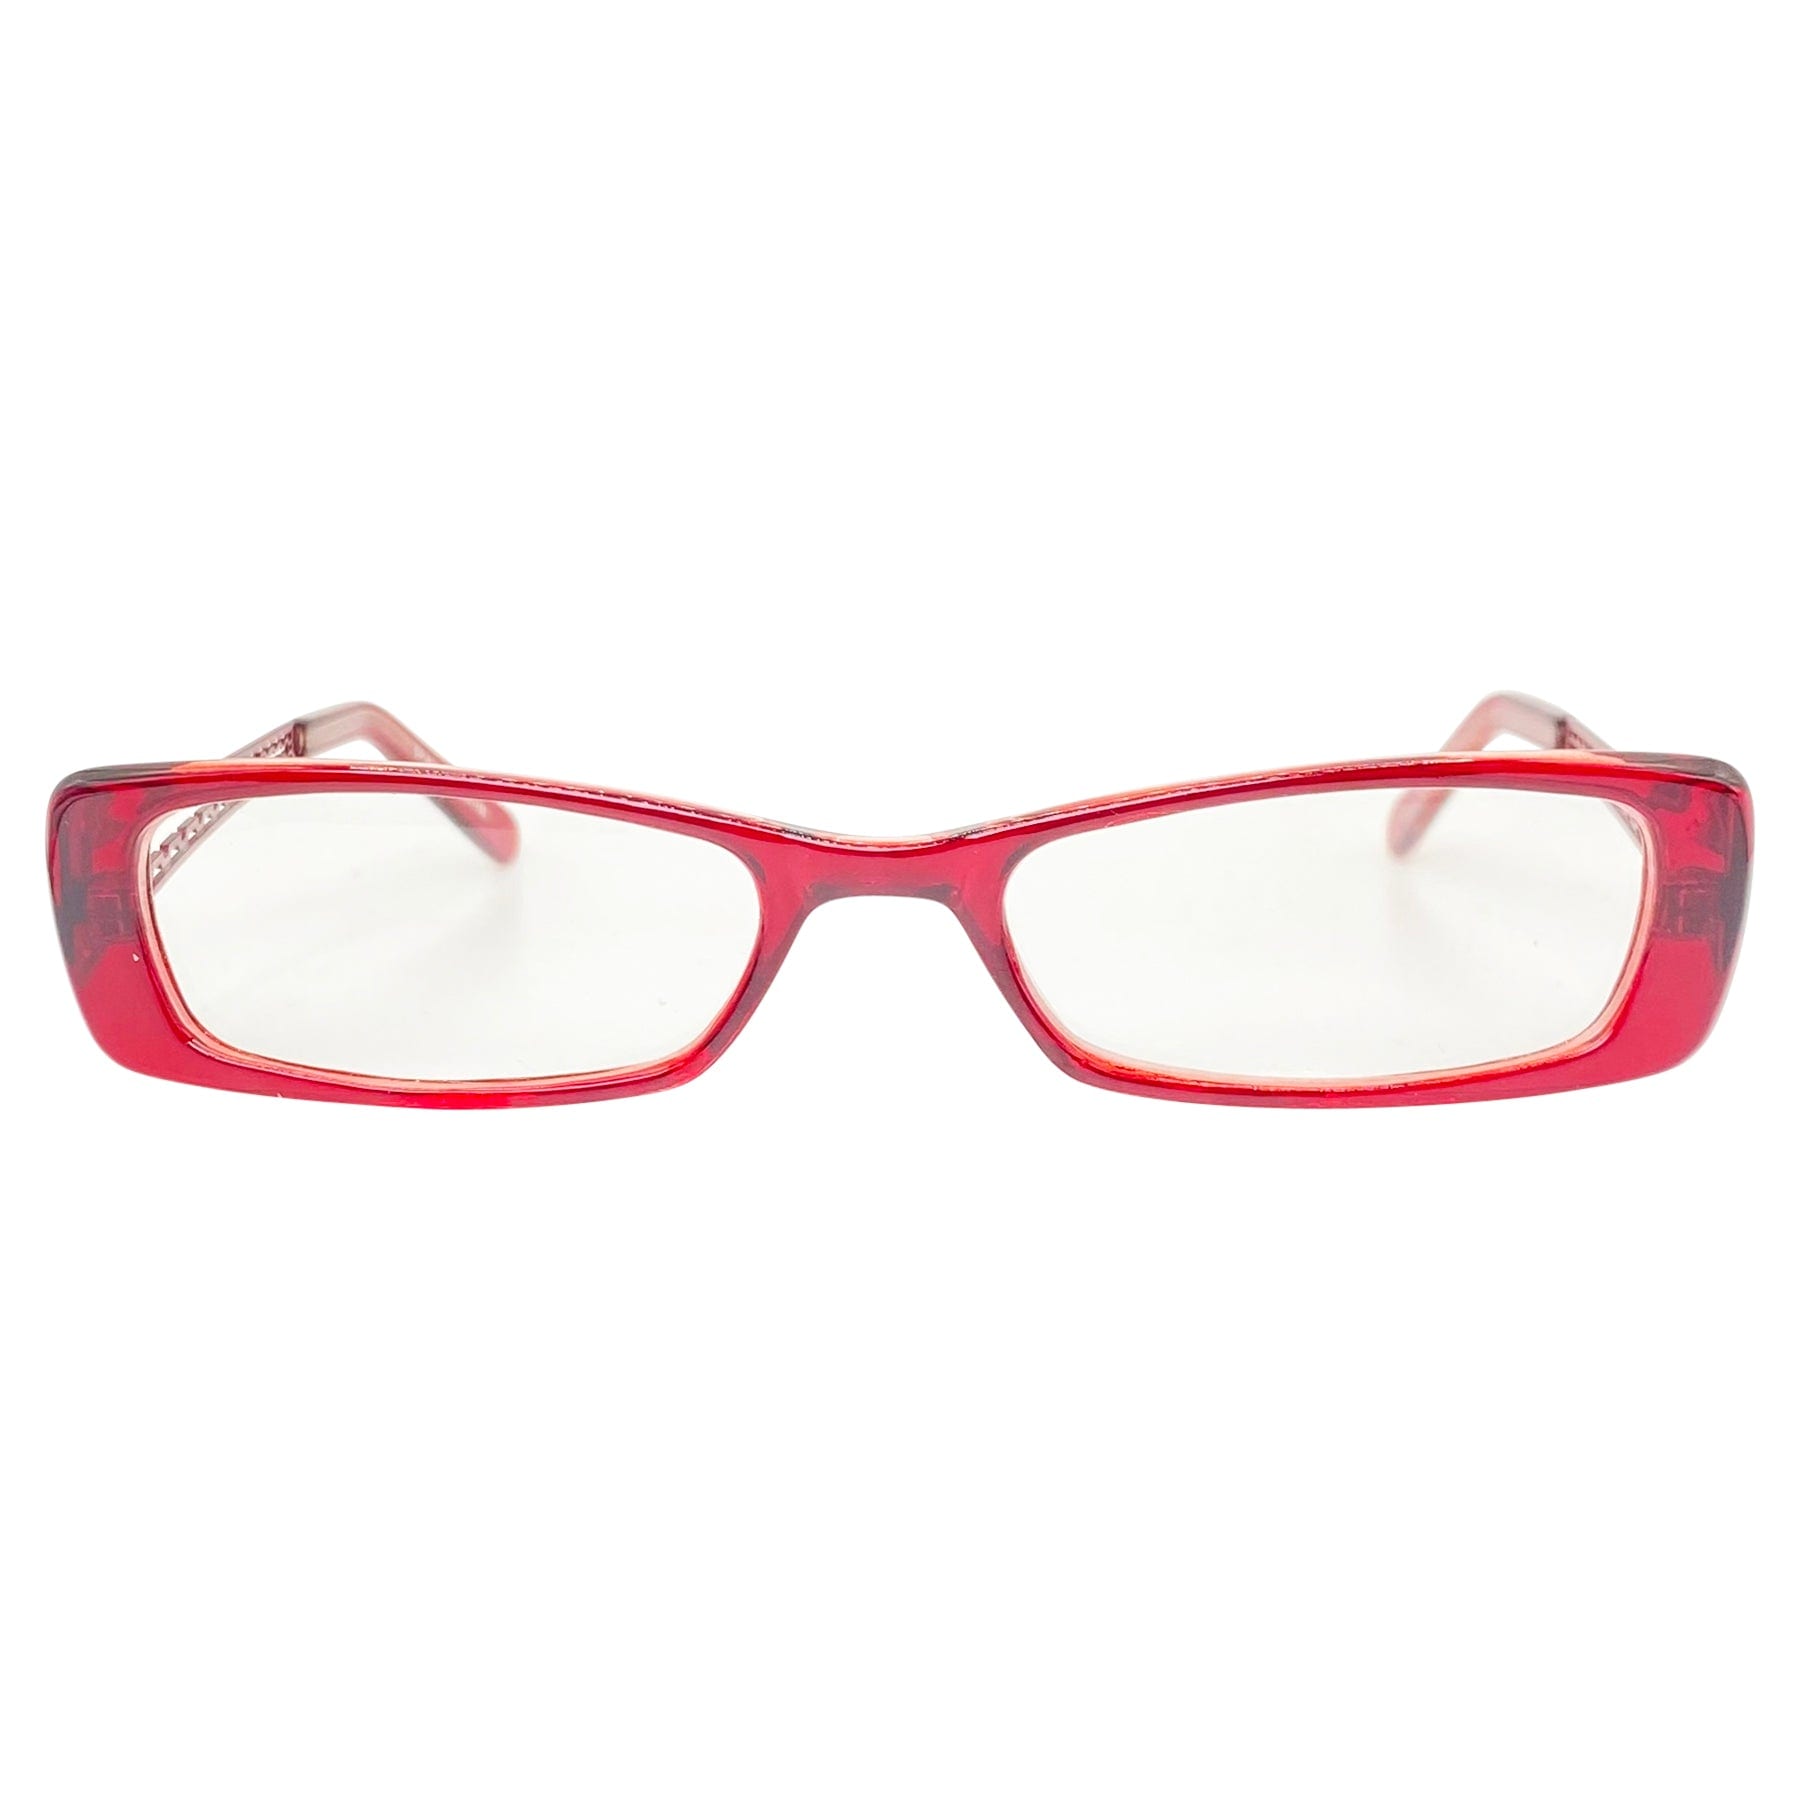 vintage 90s bayonetta style glasses with a small rectangular cat-eye frame